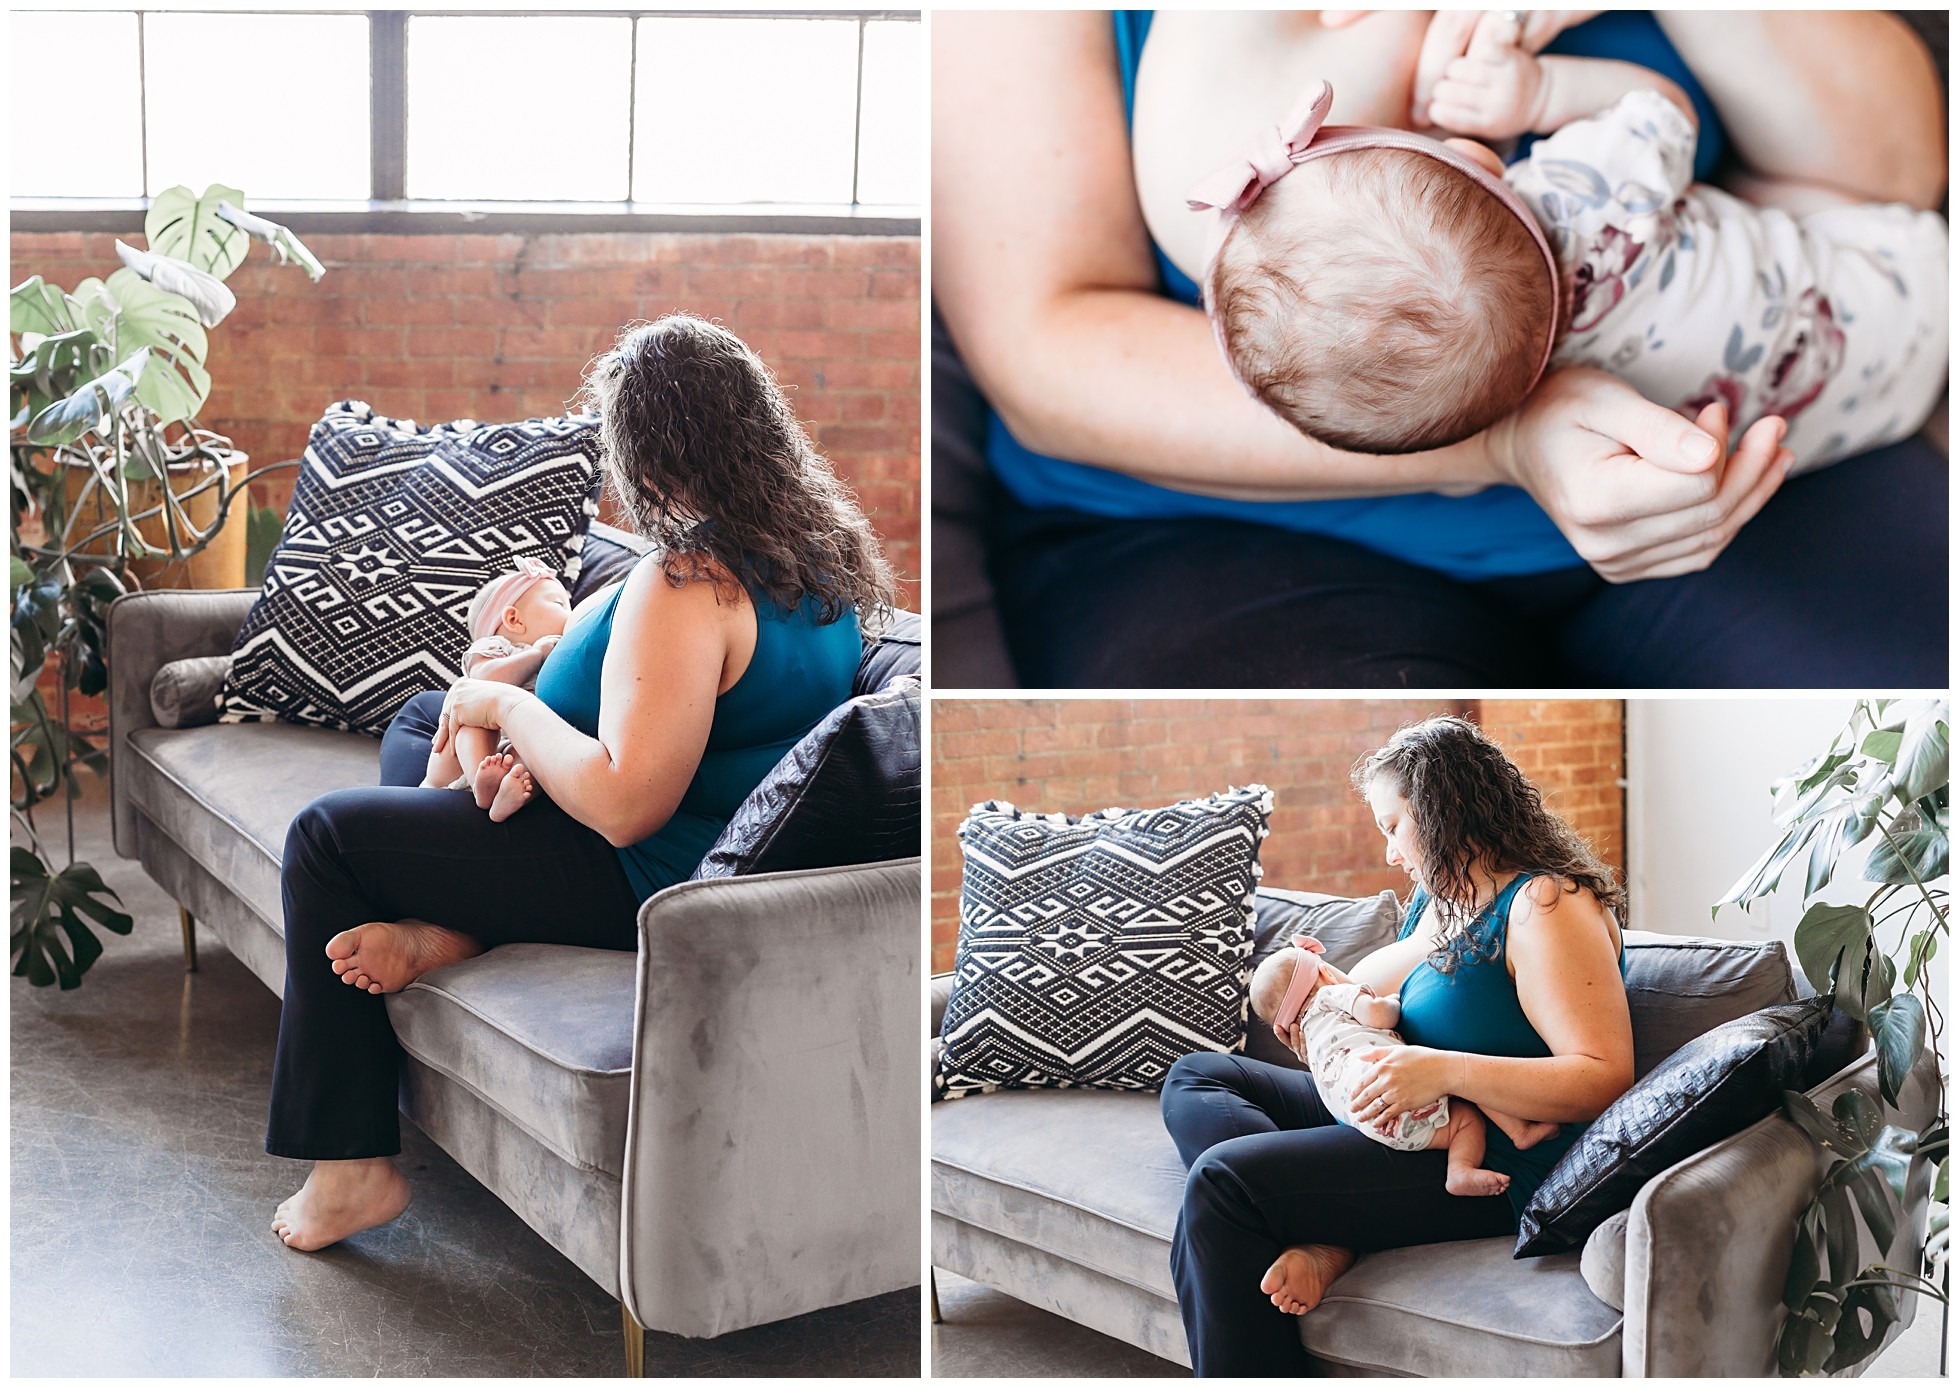 Mother nurses baby on couch during OKC motherhood photo session at White Moose Studios.